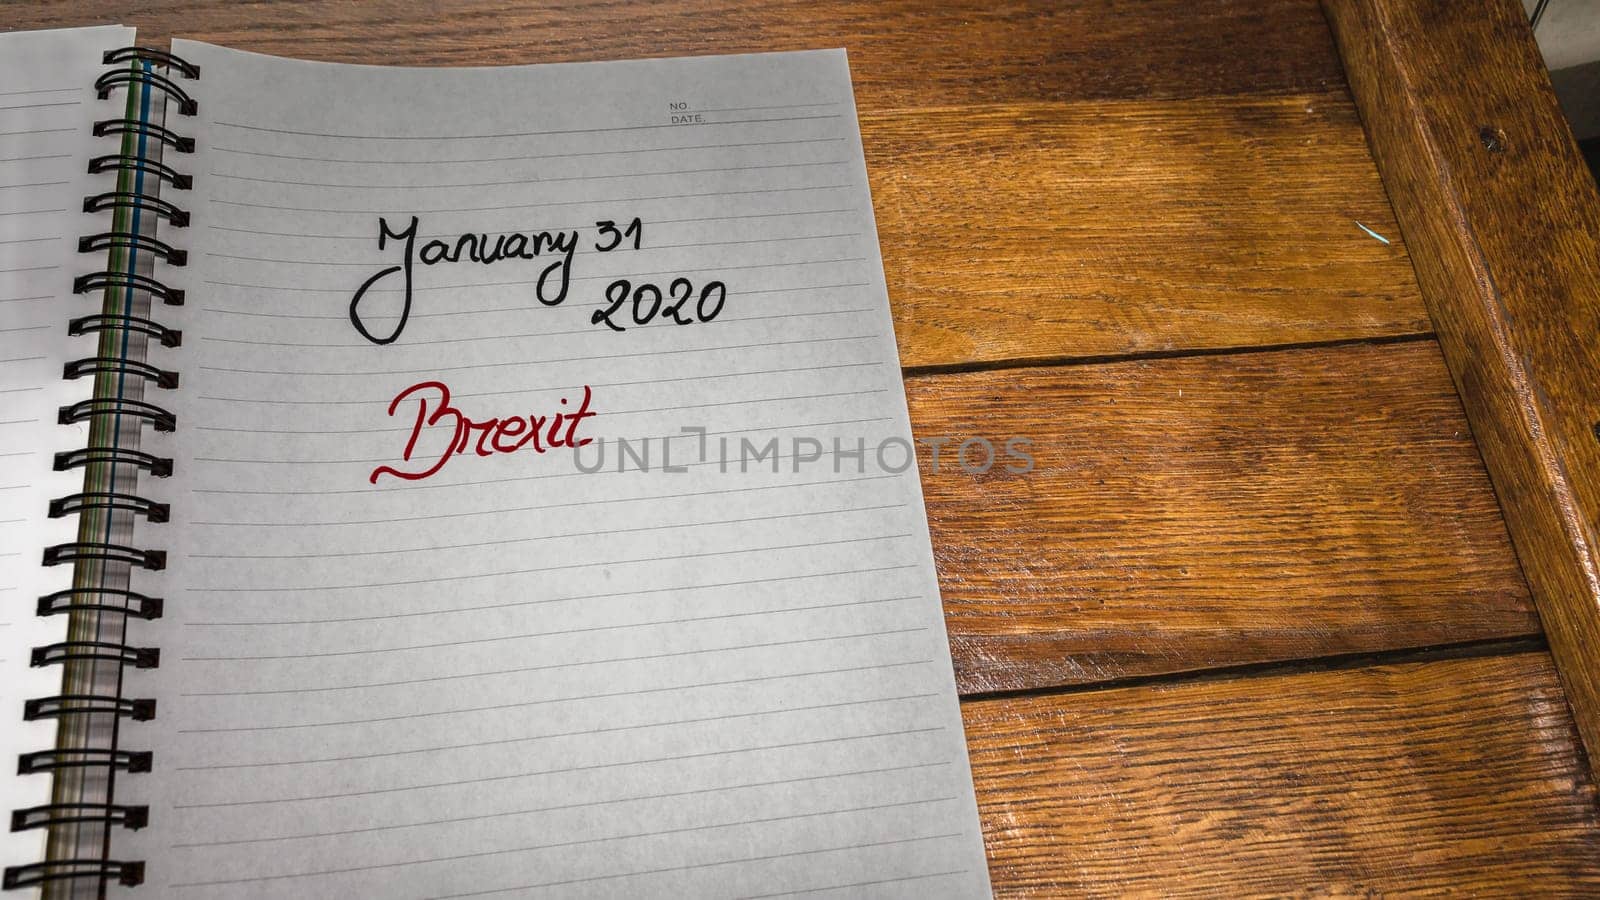 Deadline, Brexit, 31 january 2020 handwriting  text on paper, political message. Political text on office agenda. Concept of democracy, voting, politics. Copy space.